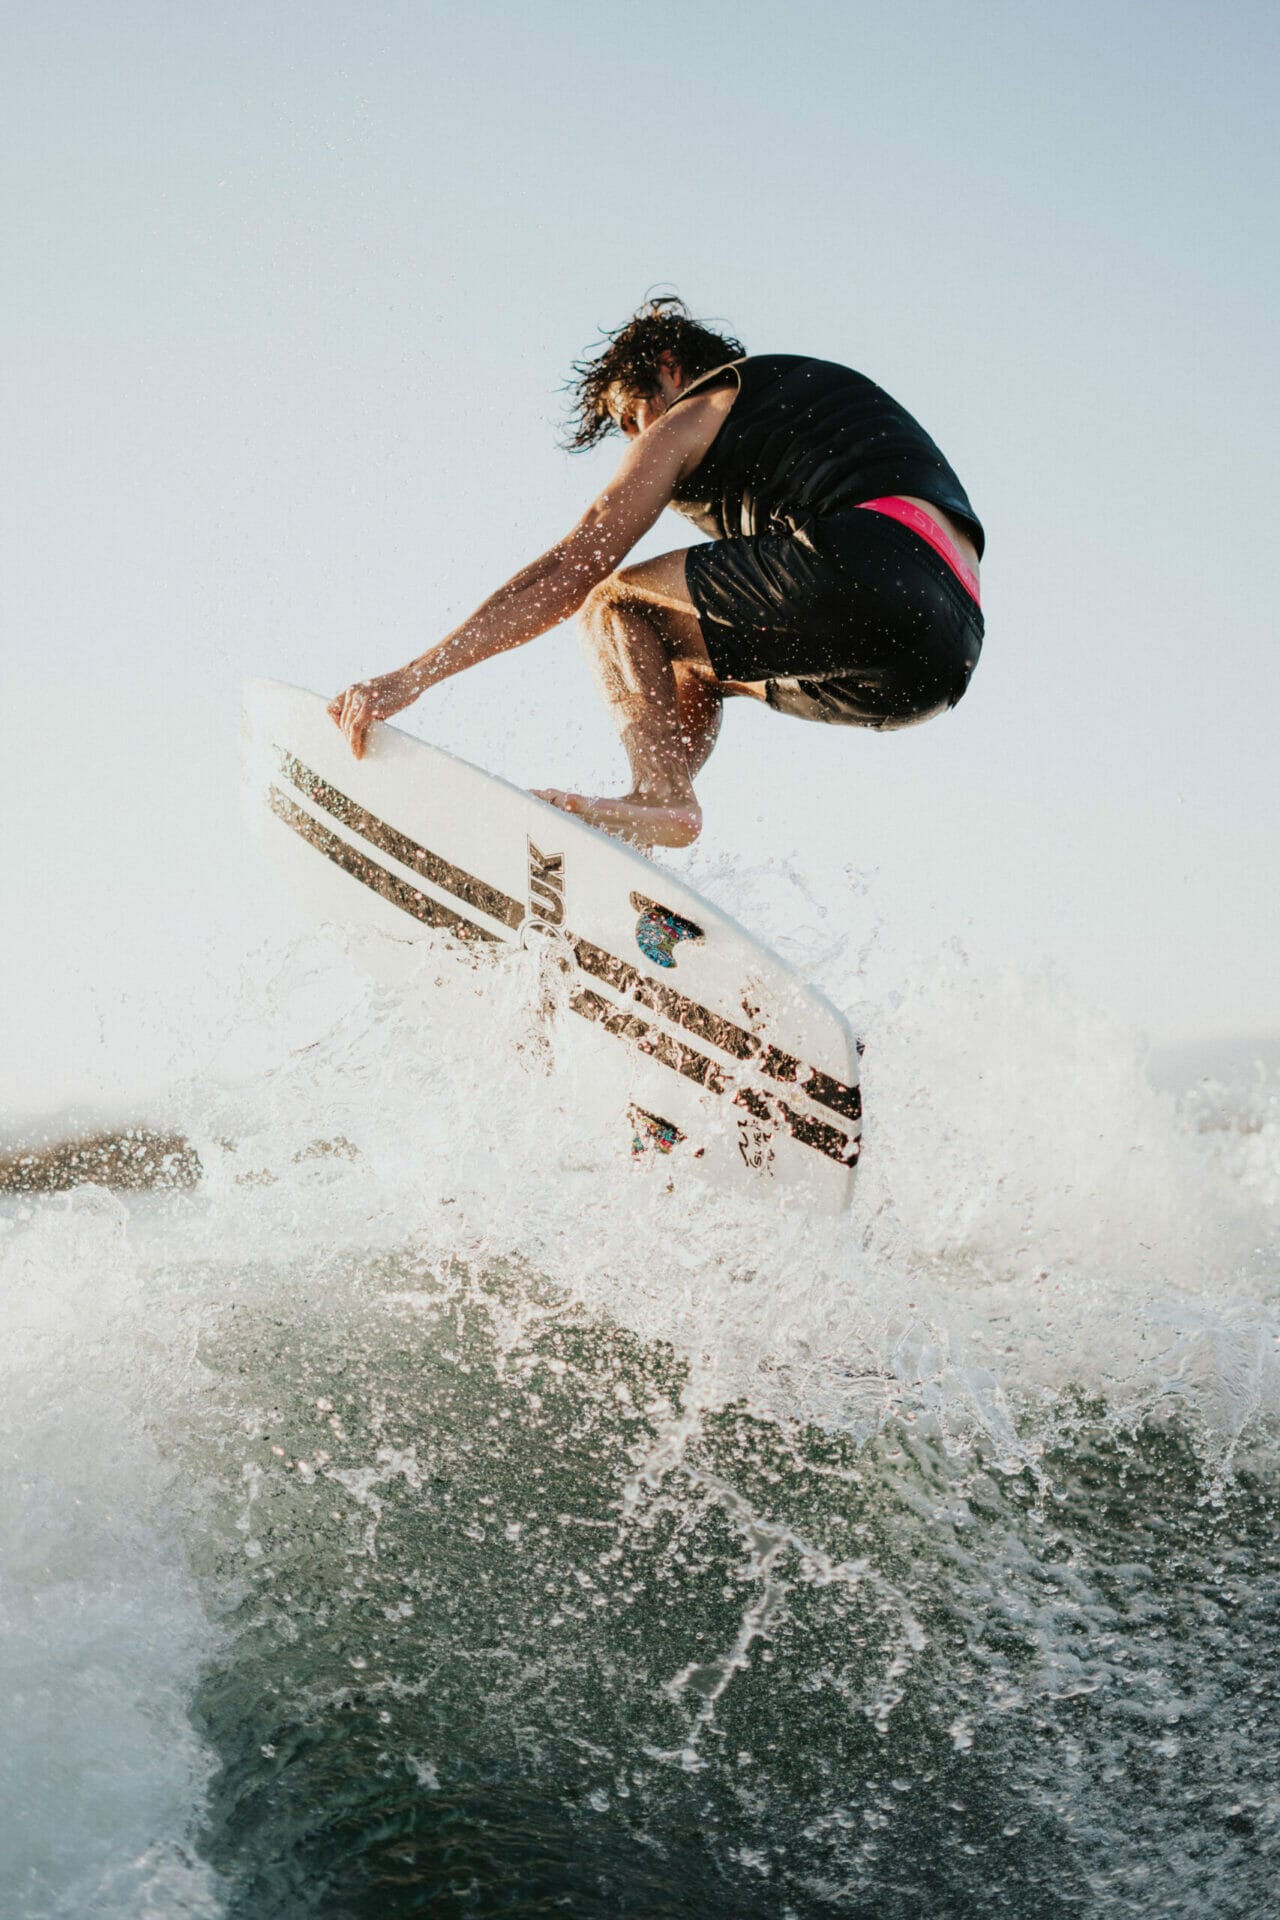 A man wakesurfing behind a boat on a wave.